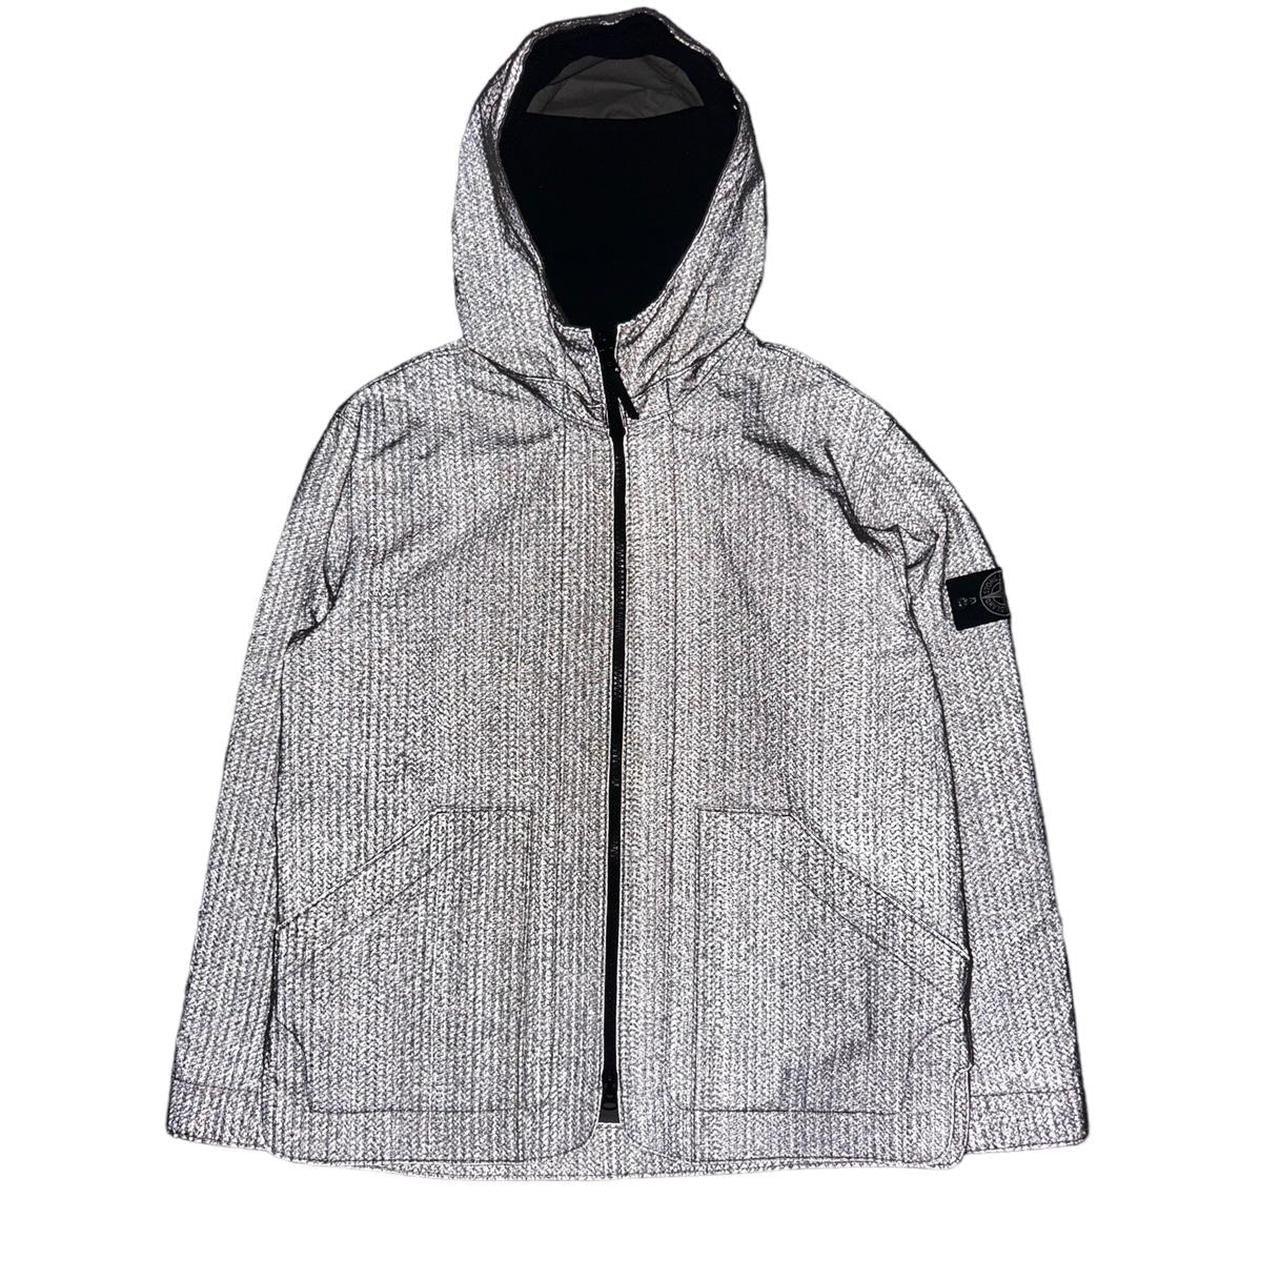 Stone Island Needle Punched Jacket - Known Source